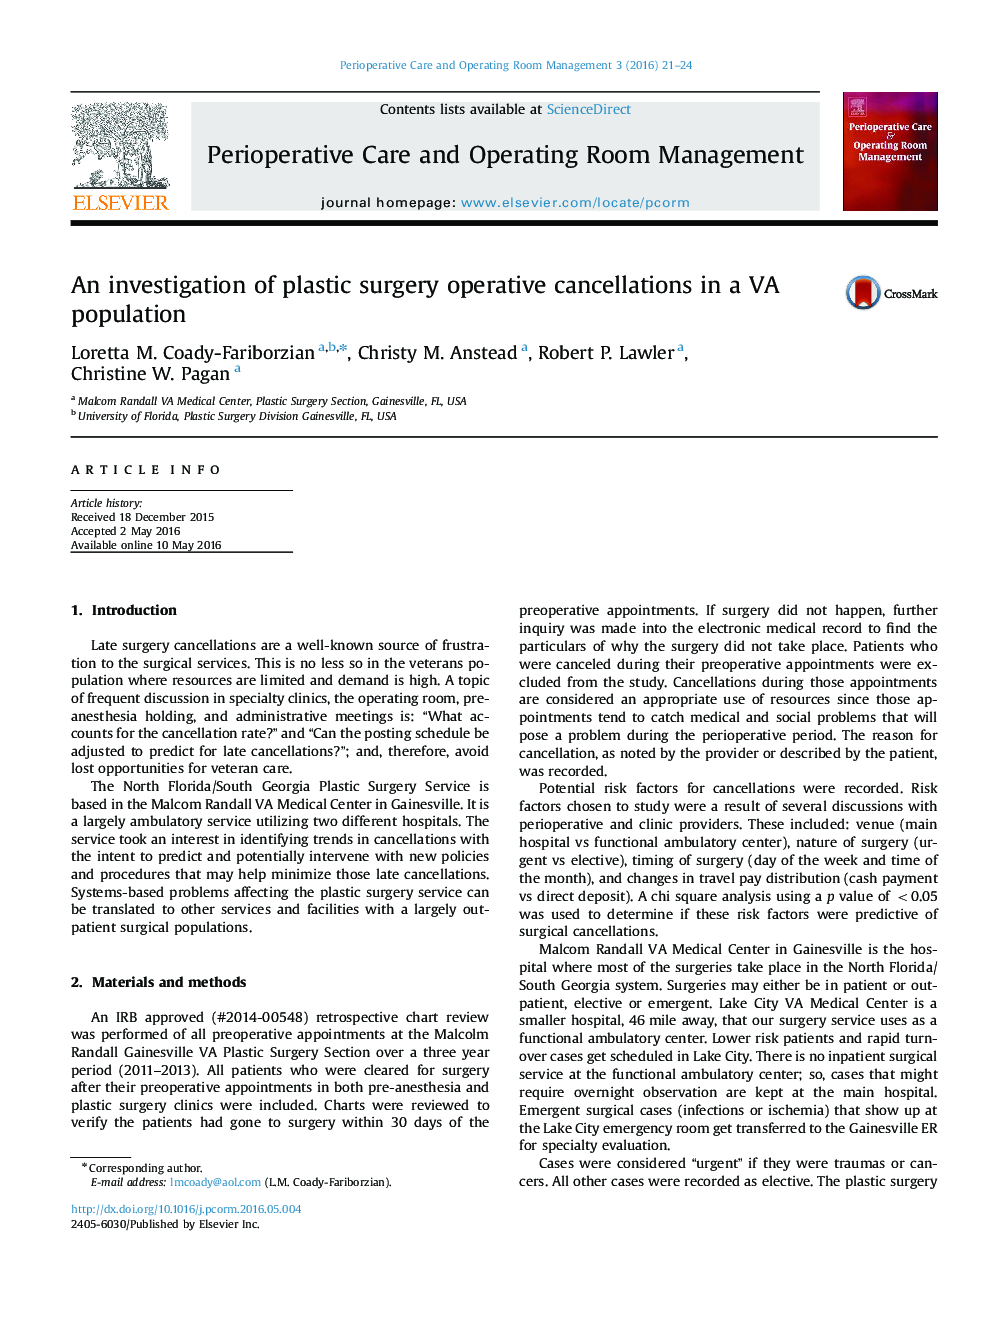 An investigation of plastic surgery operative cancellations in a VA population